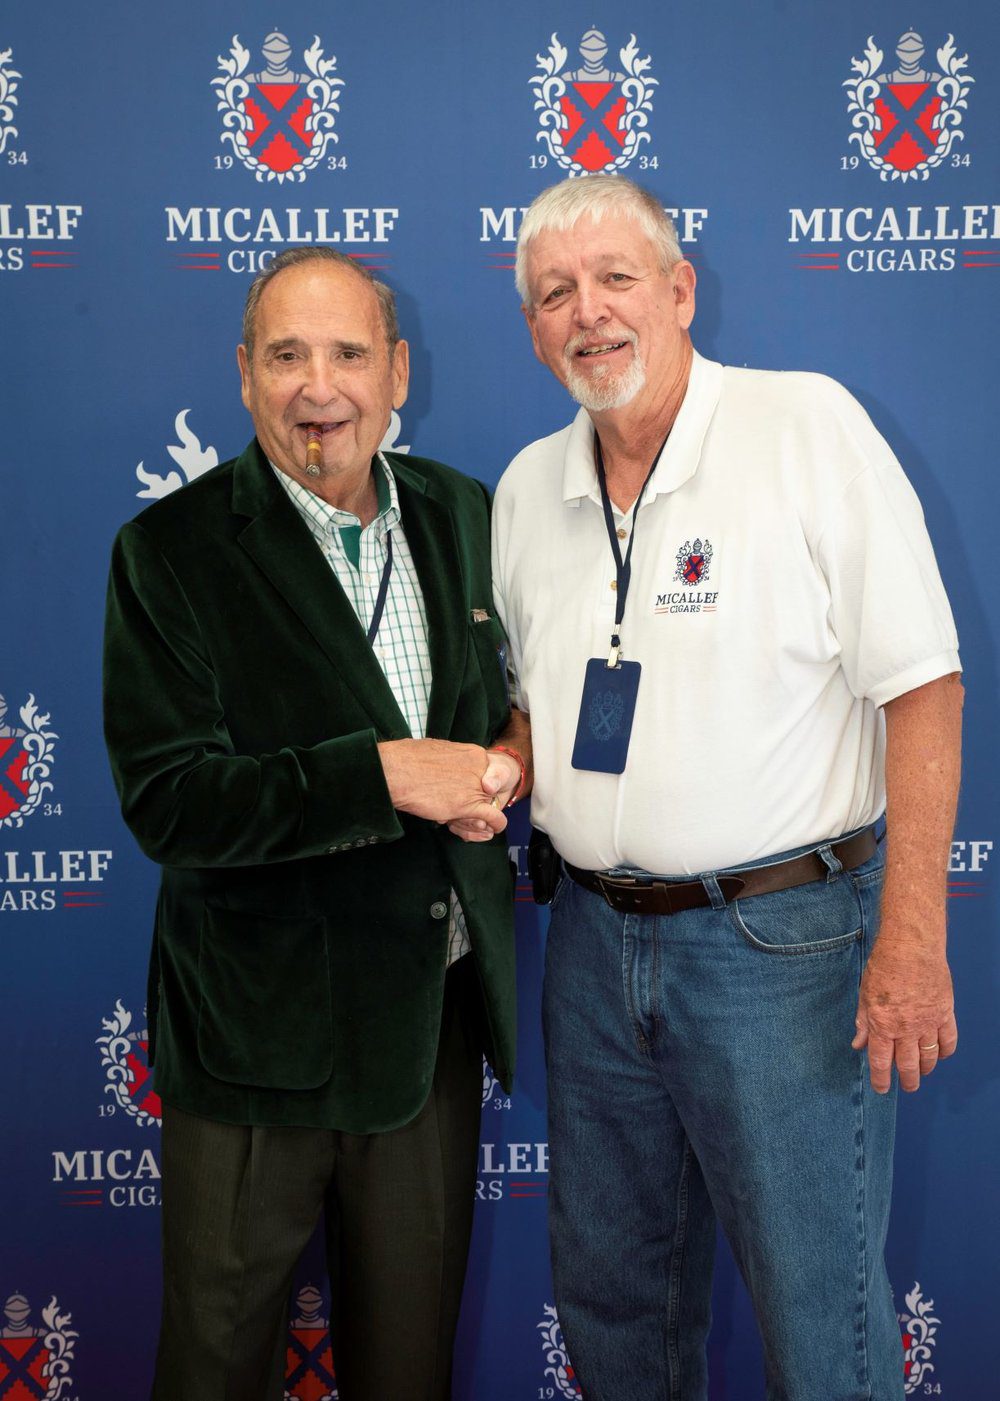 Al Micallef with Micallef Cigars 2021 Ambassador of the Year Larry Frank.jpg